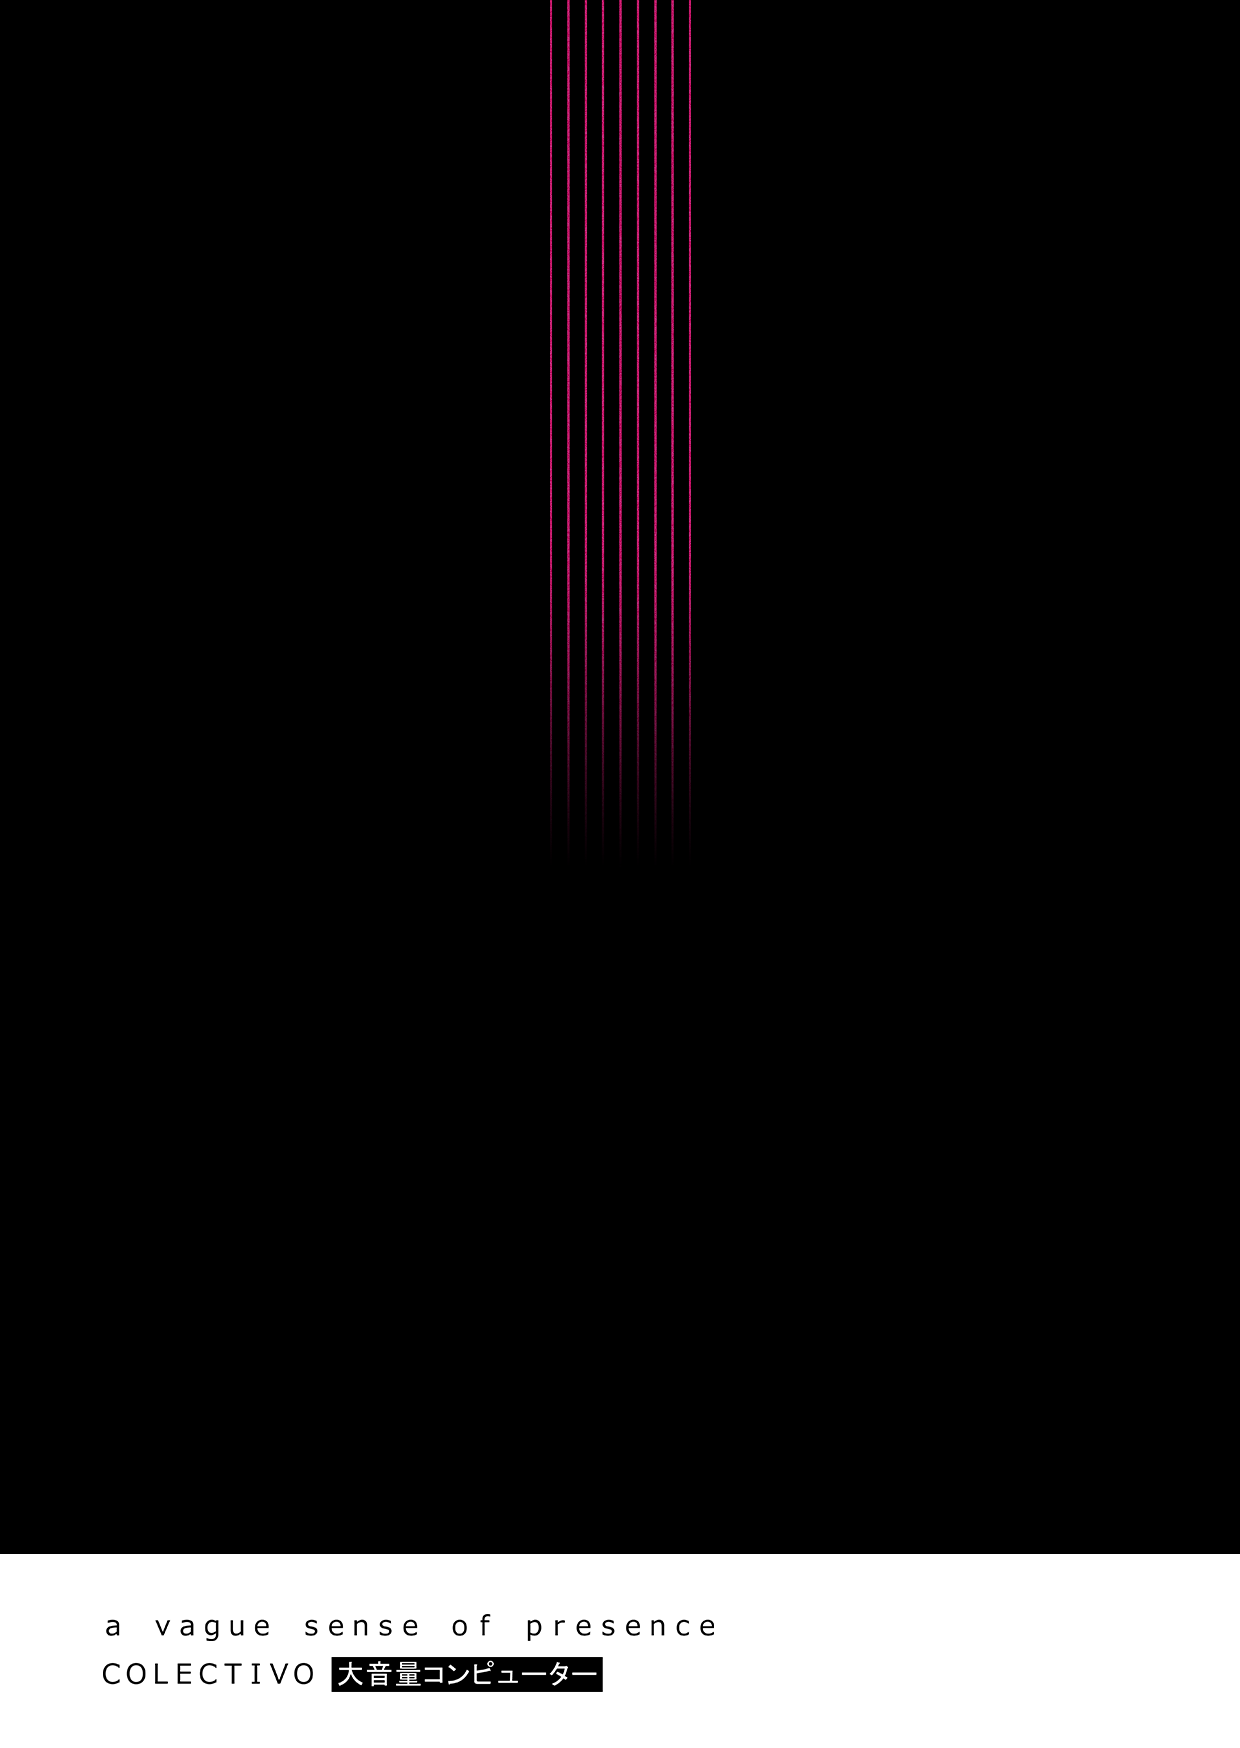 Nine red-pink lines descend from above, parallel to each other, into a background of black void. Below, the name of the installation and of the collective.